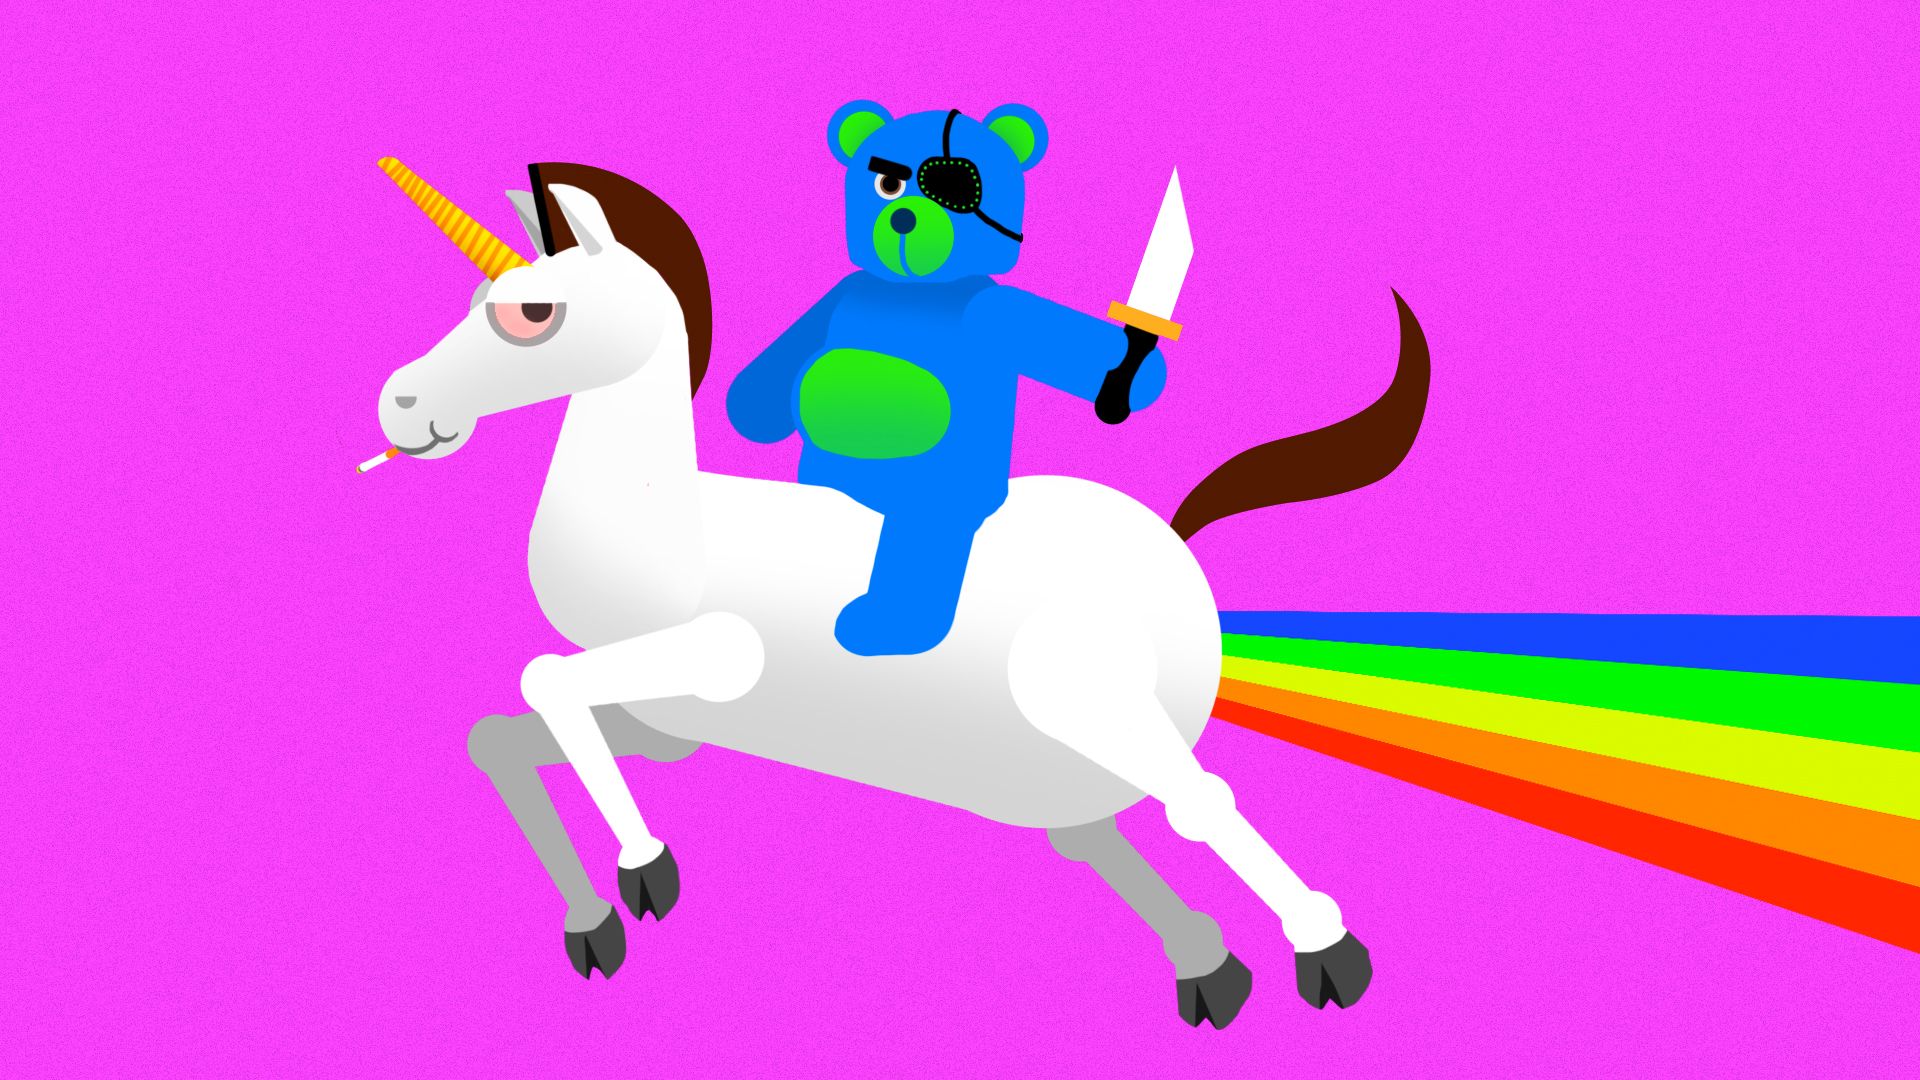 An evil-looking teddy bear with an eye patch rides a unicorn and holds a knife